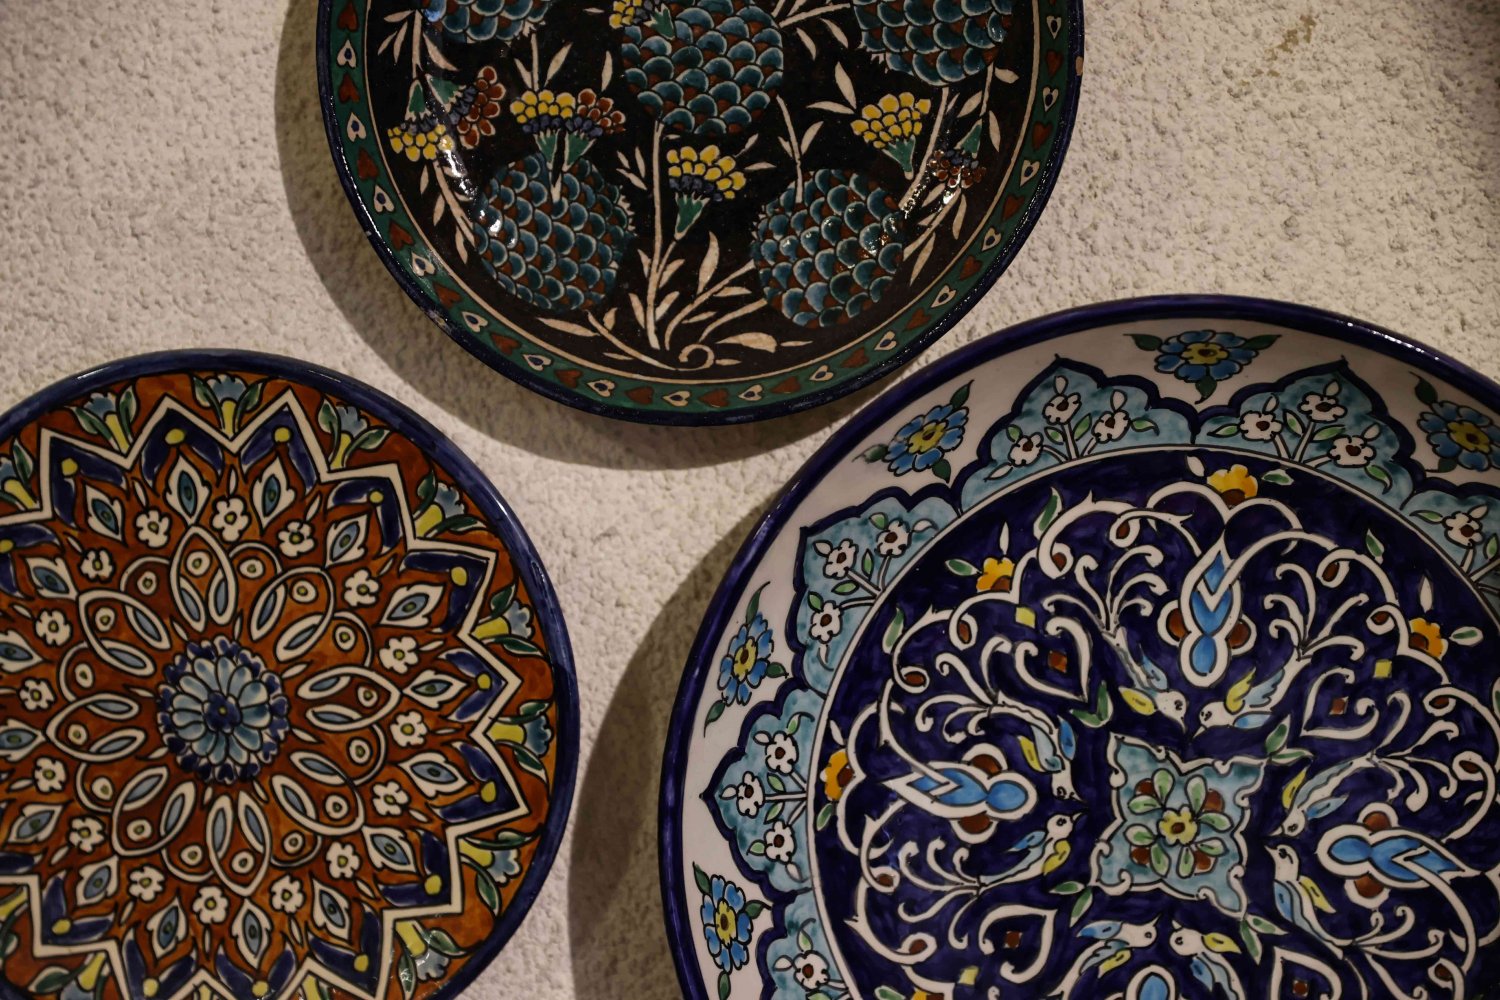 Brightly-colored hand-painted Armenian ceramic art pieces on display in the Balian shop in East Jerusalem 